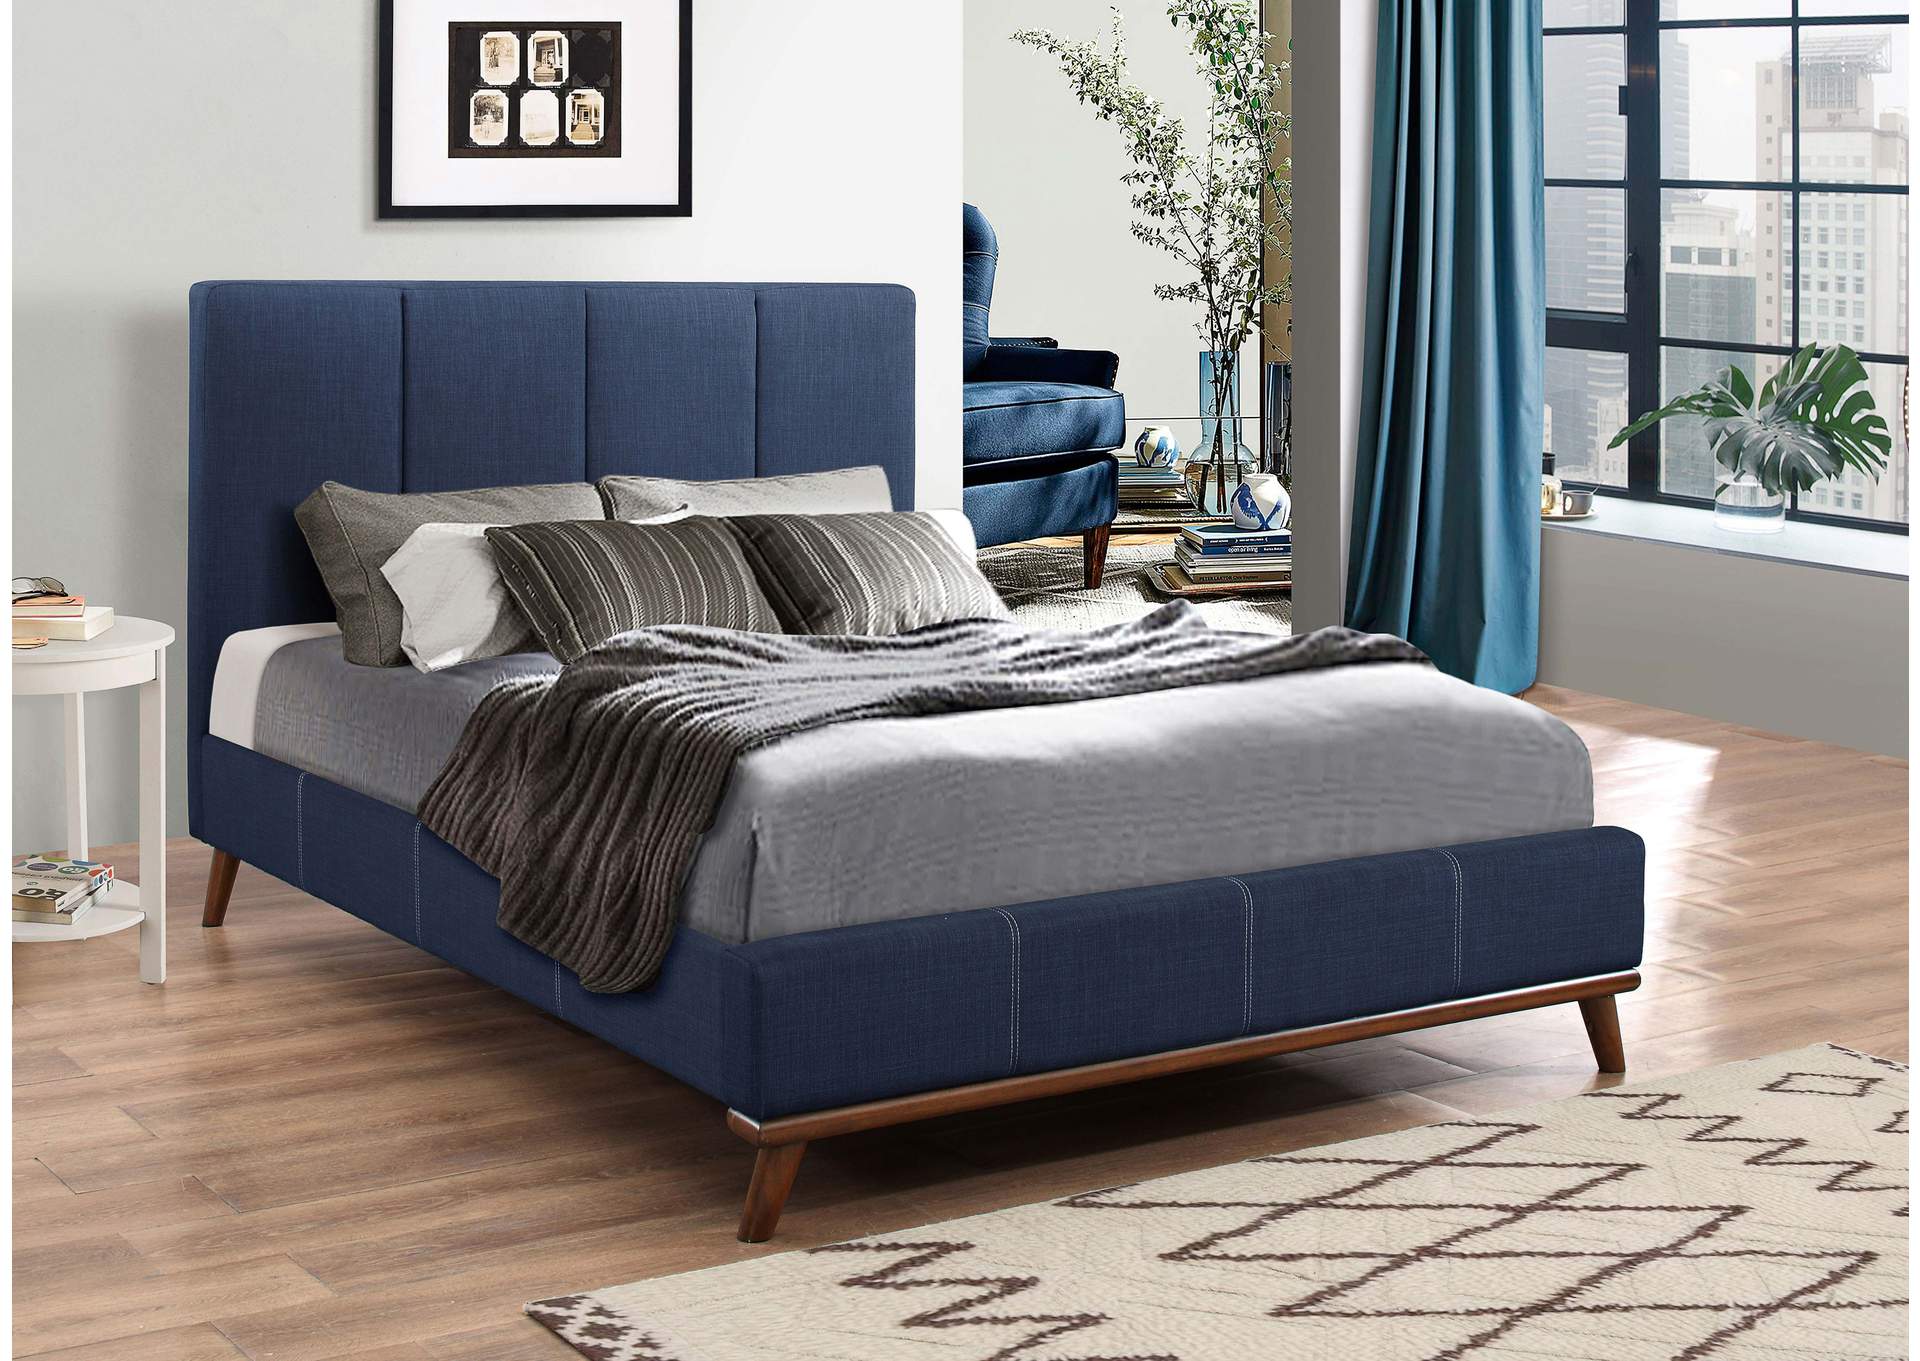 Charity Eastern King Upholstered Bed Blue,Coaster Furniture